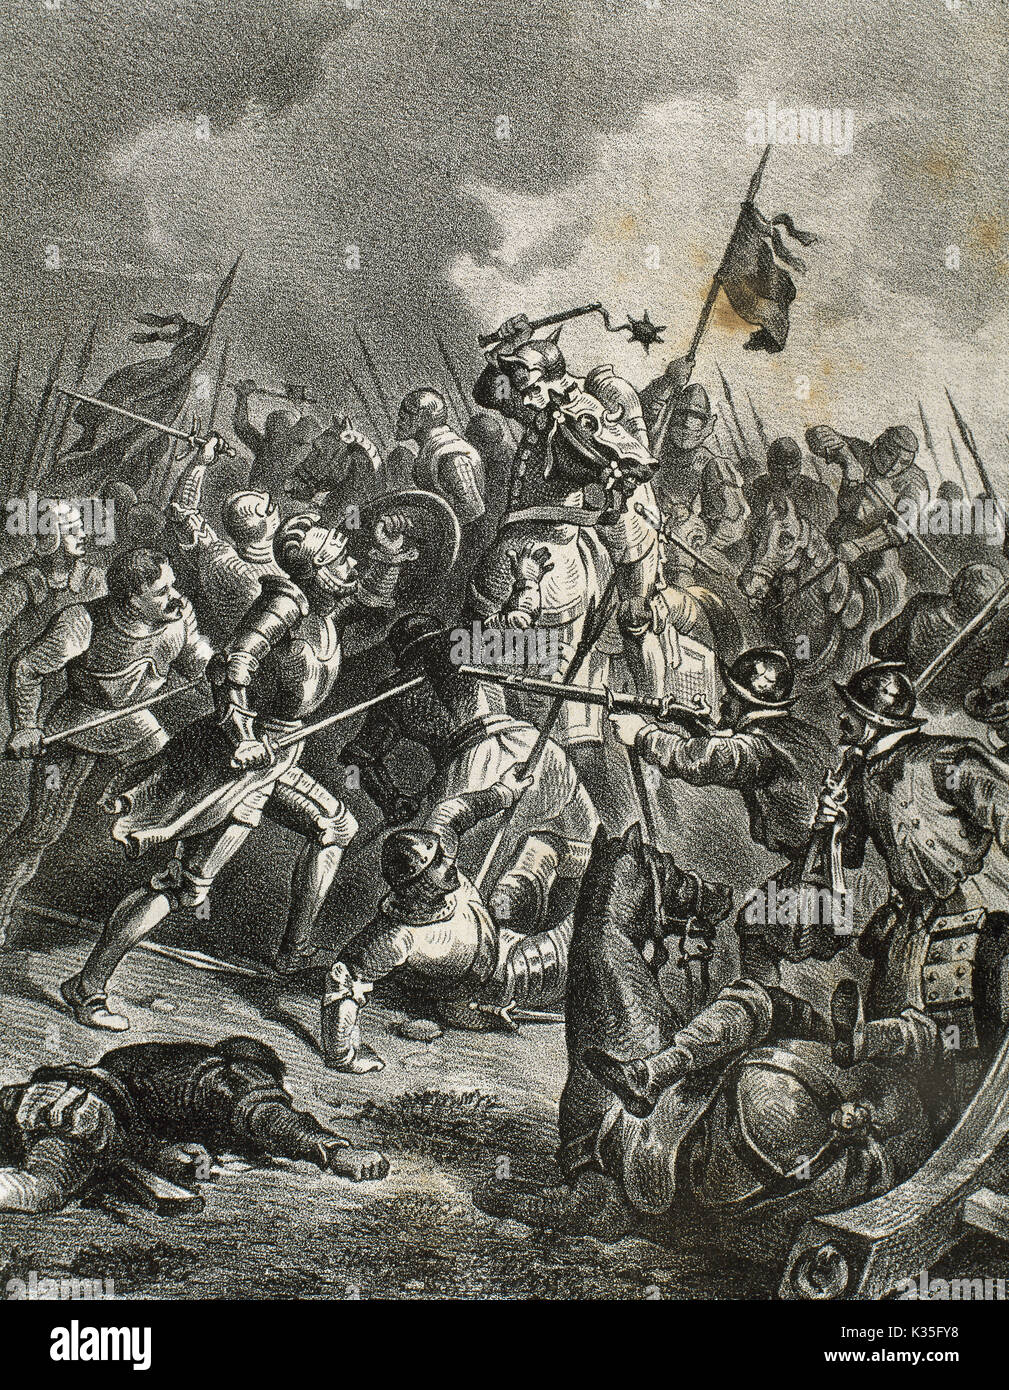 The Italian War of 1542-1546. Battle of Ceresole, 11 April, 1544. The French army, commanded by François de Bourbon (1519-1546), Count of Enghien, defeated the combined forces of the Holy Roman Empire and Spain, commanded by Alfonso d'Avalos d'Aquino (1502-1546), Marquis del Vasto. Engraving. Stock Photo